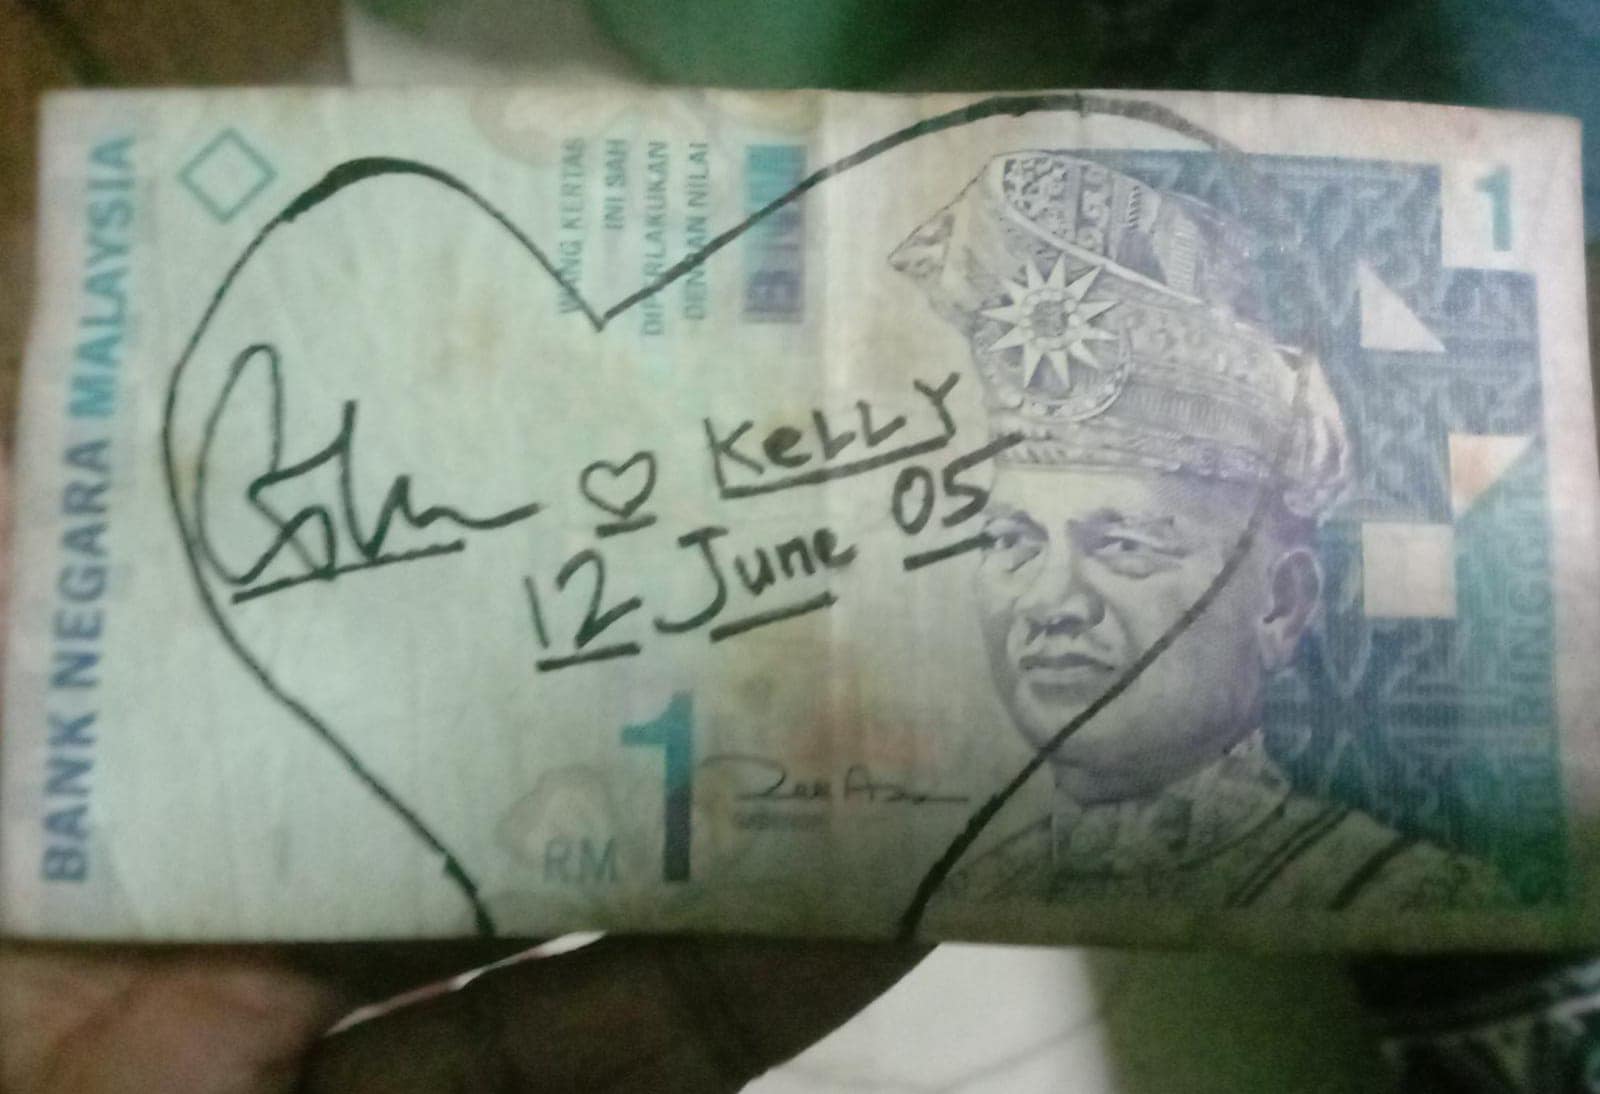 S'porean lady finds rm1 note with 'love signature' dating back to 2005 on it, asks couple to claim it | weirdkaya